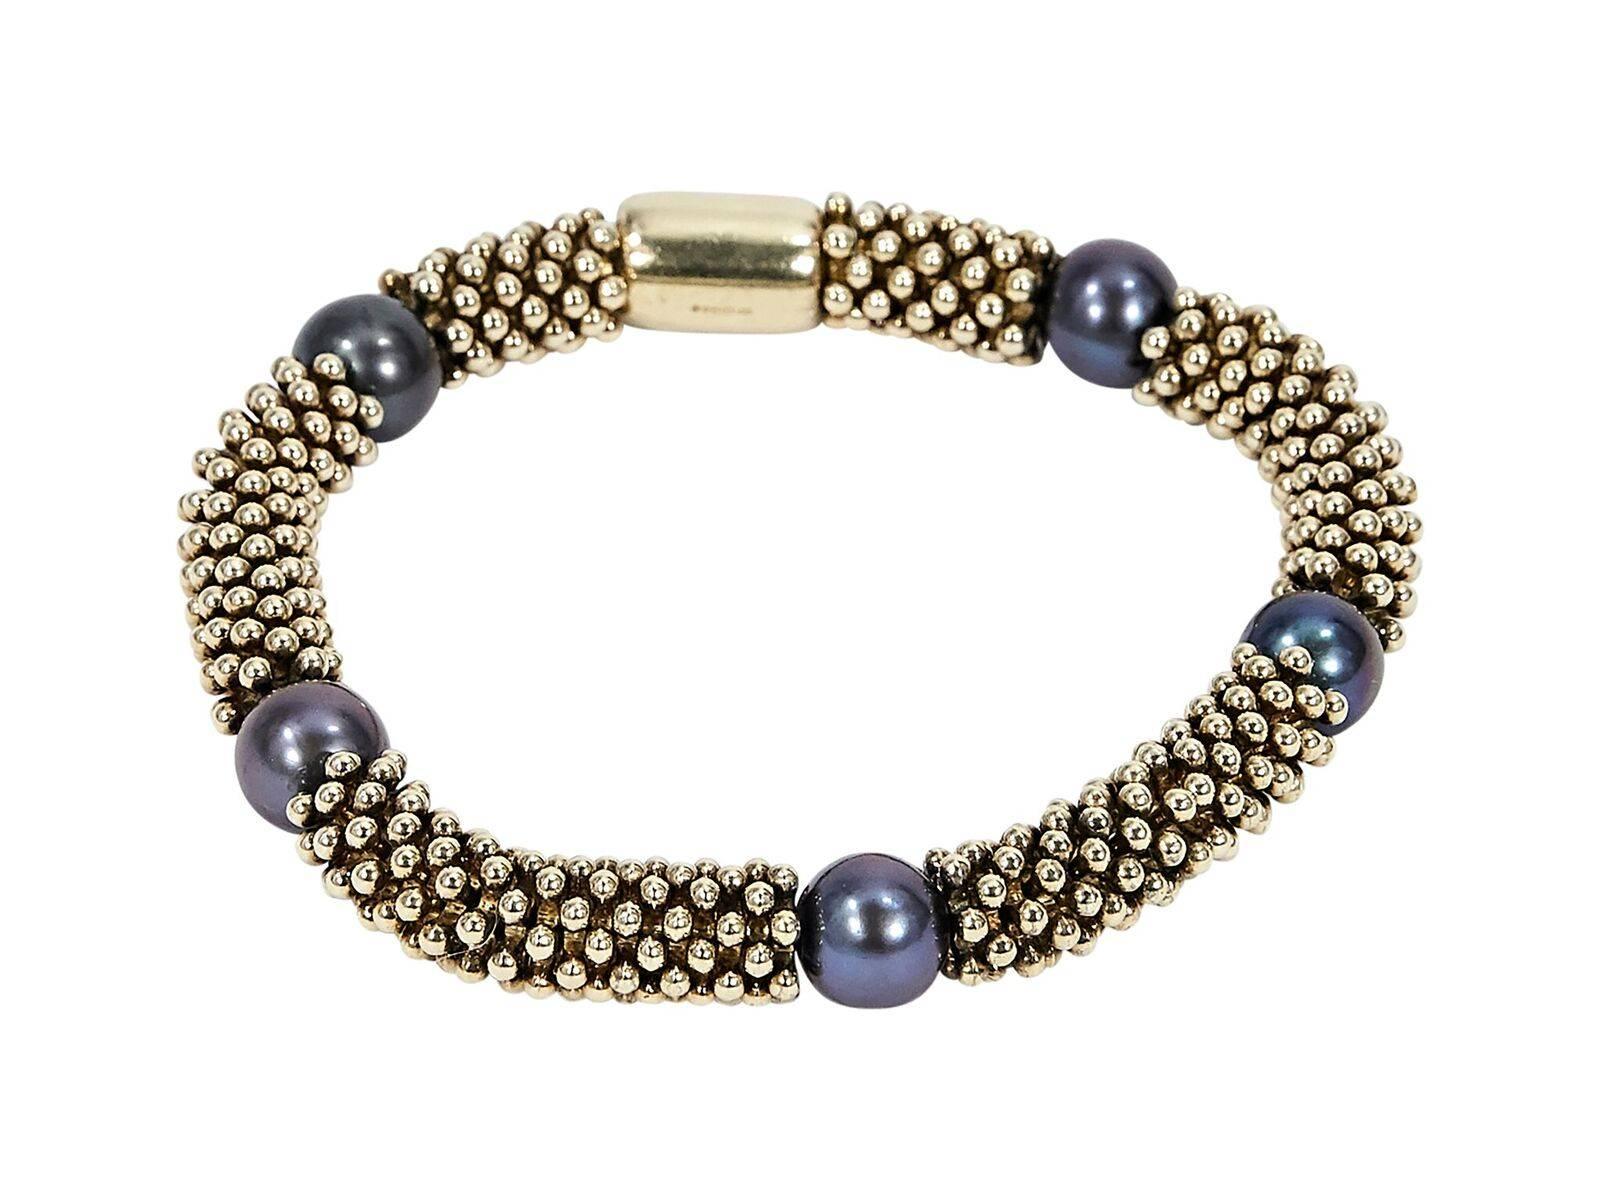 Product details:  Goldtone Effervescence bracelet by Links of London.  Accented with black pearls.  Stretch fit. 
Condition: Pre-owned. Very good.
Est. Retail $325